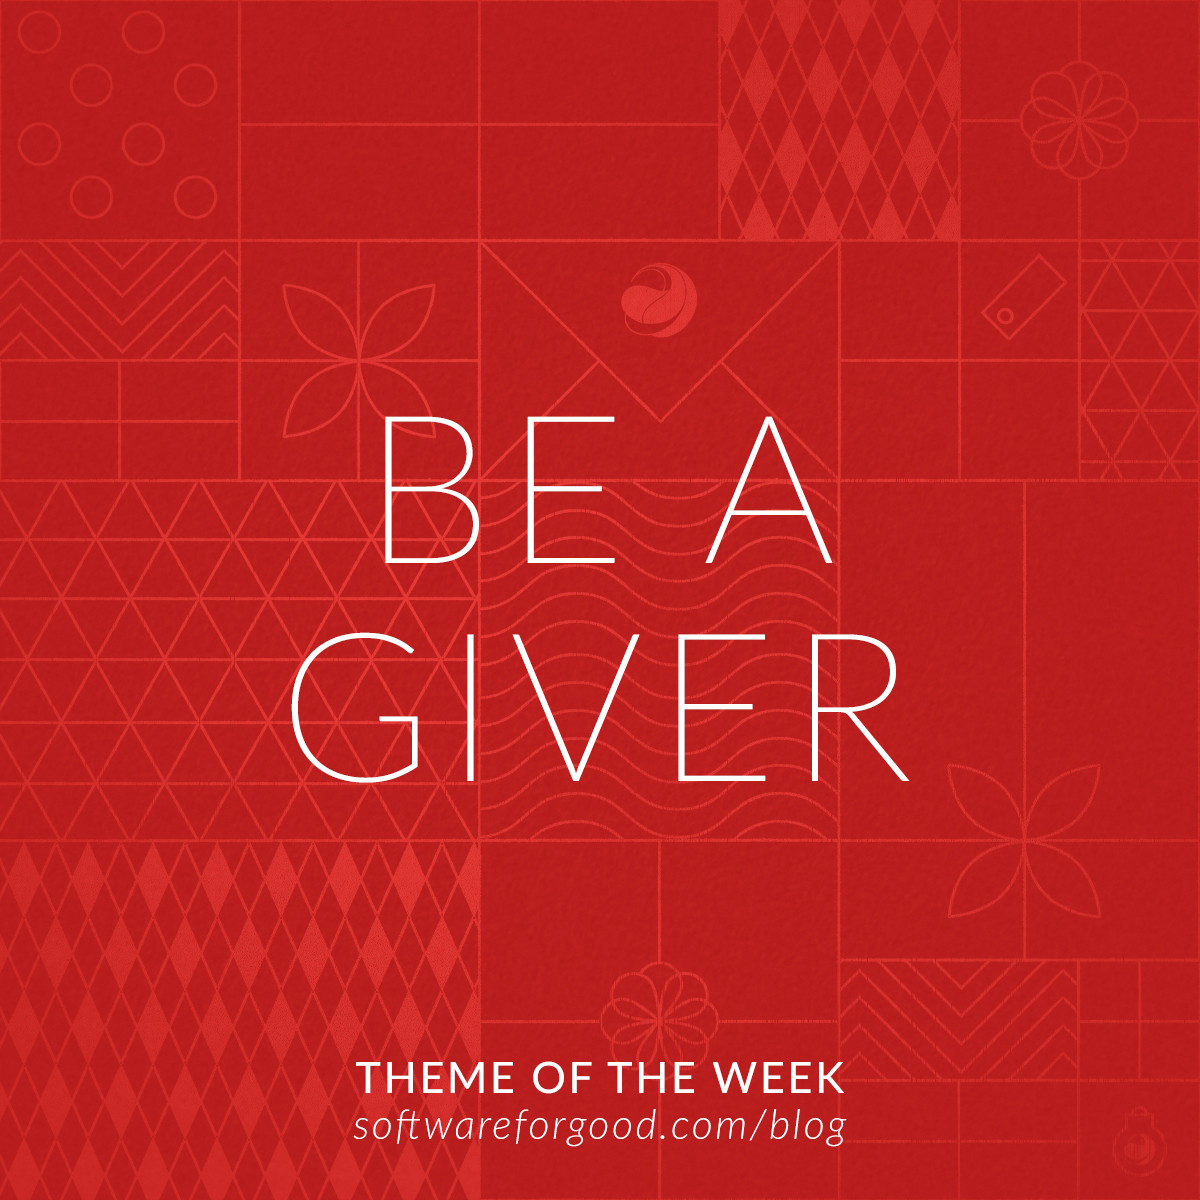 Be a Giver